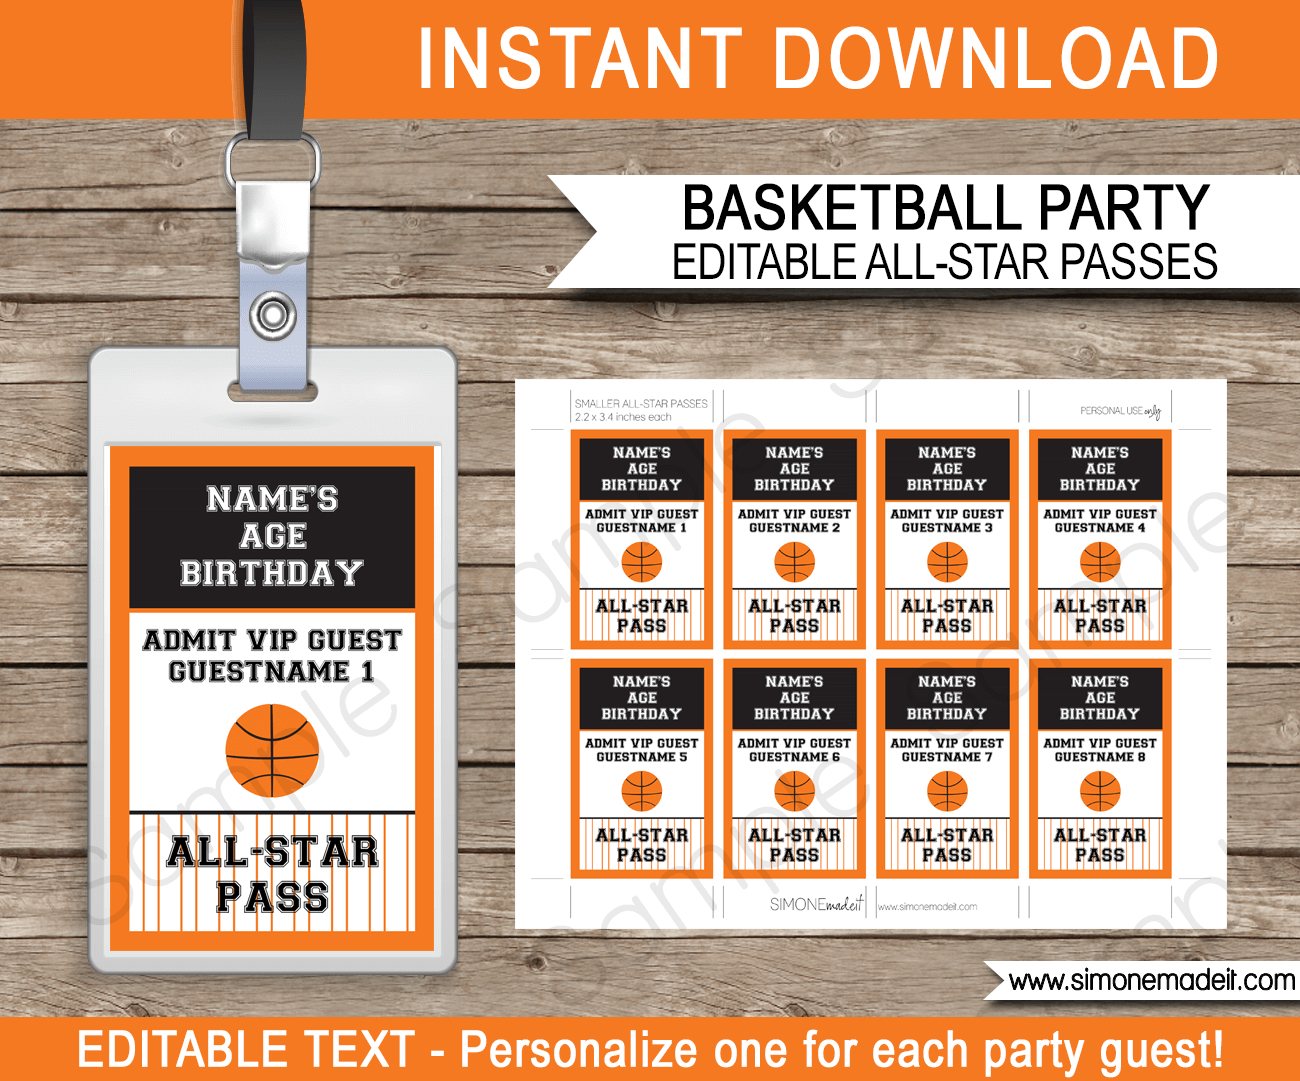 Basketball Party All Star VIP Passes | Printable Inserts | Party Favors | Birthday Party | Editable DIY Template | $3.50 INSTANT DOWNLOAD via SIMONEmadeit.com